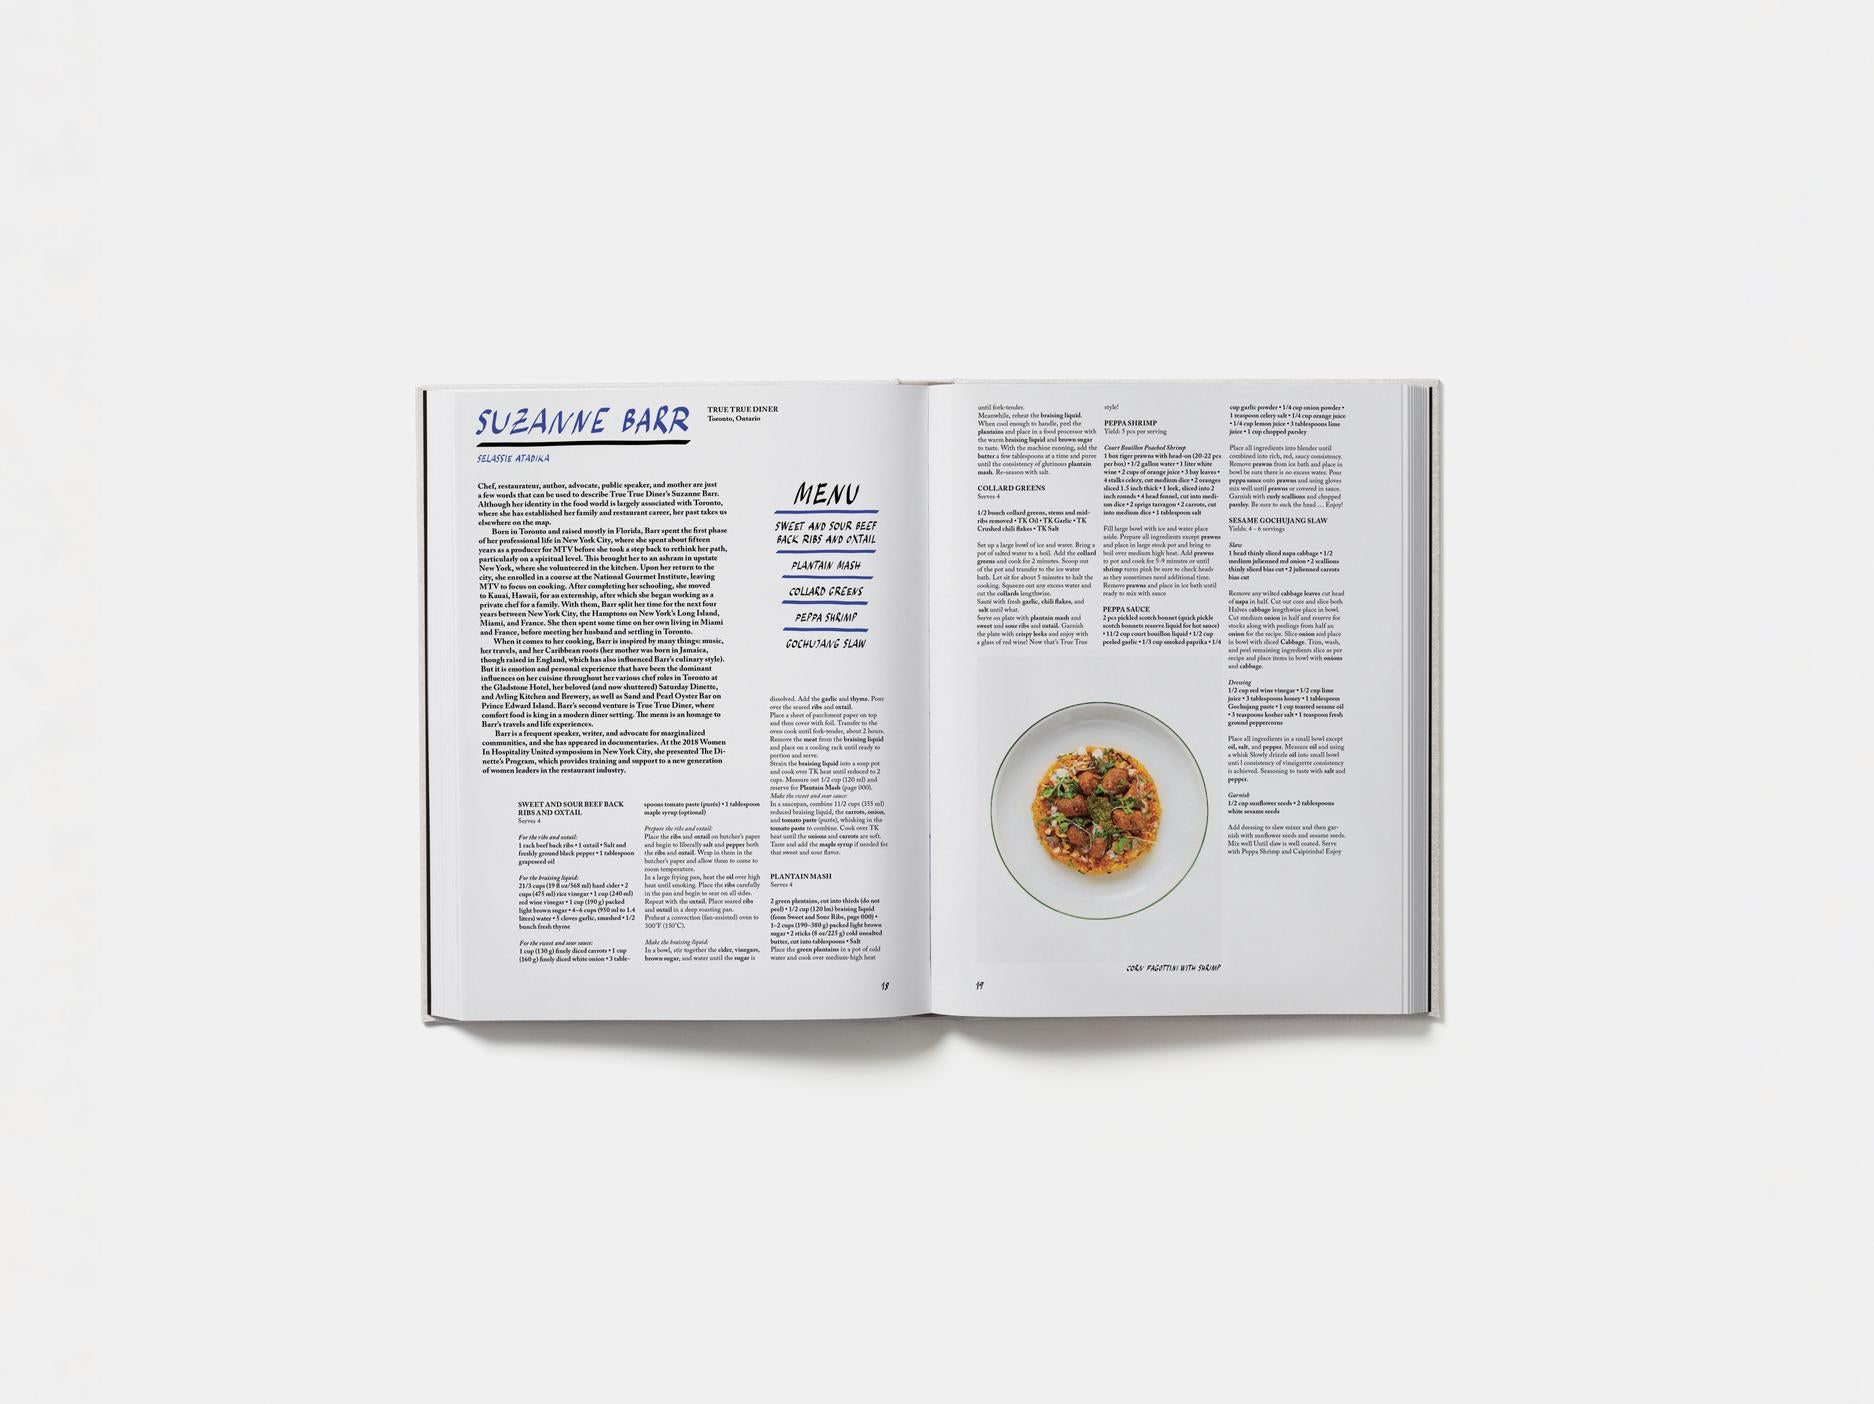 Get to know 100 of the most exciting rising-star chefs from around the world - as selected by 20 culinary masters

The international dining scene is a vast, ever-shifting landscape, and Today's Special is perfectly positioned to help readers